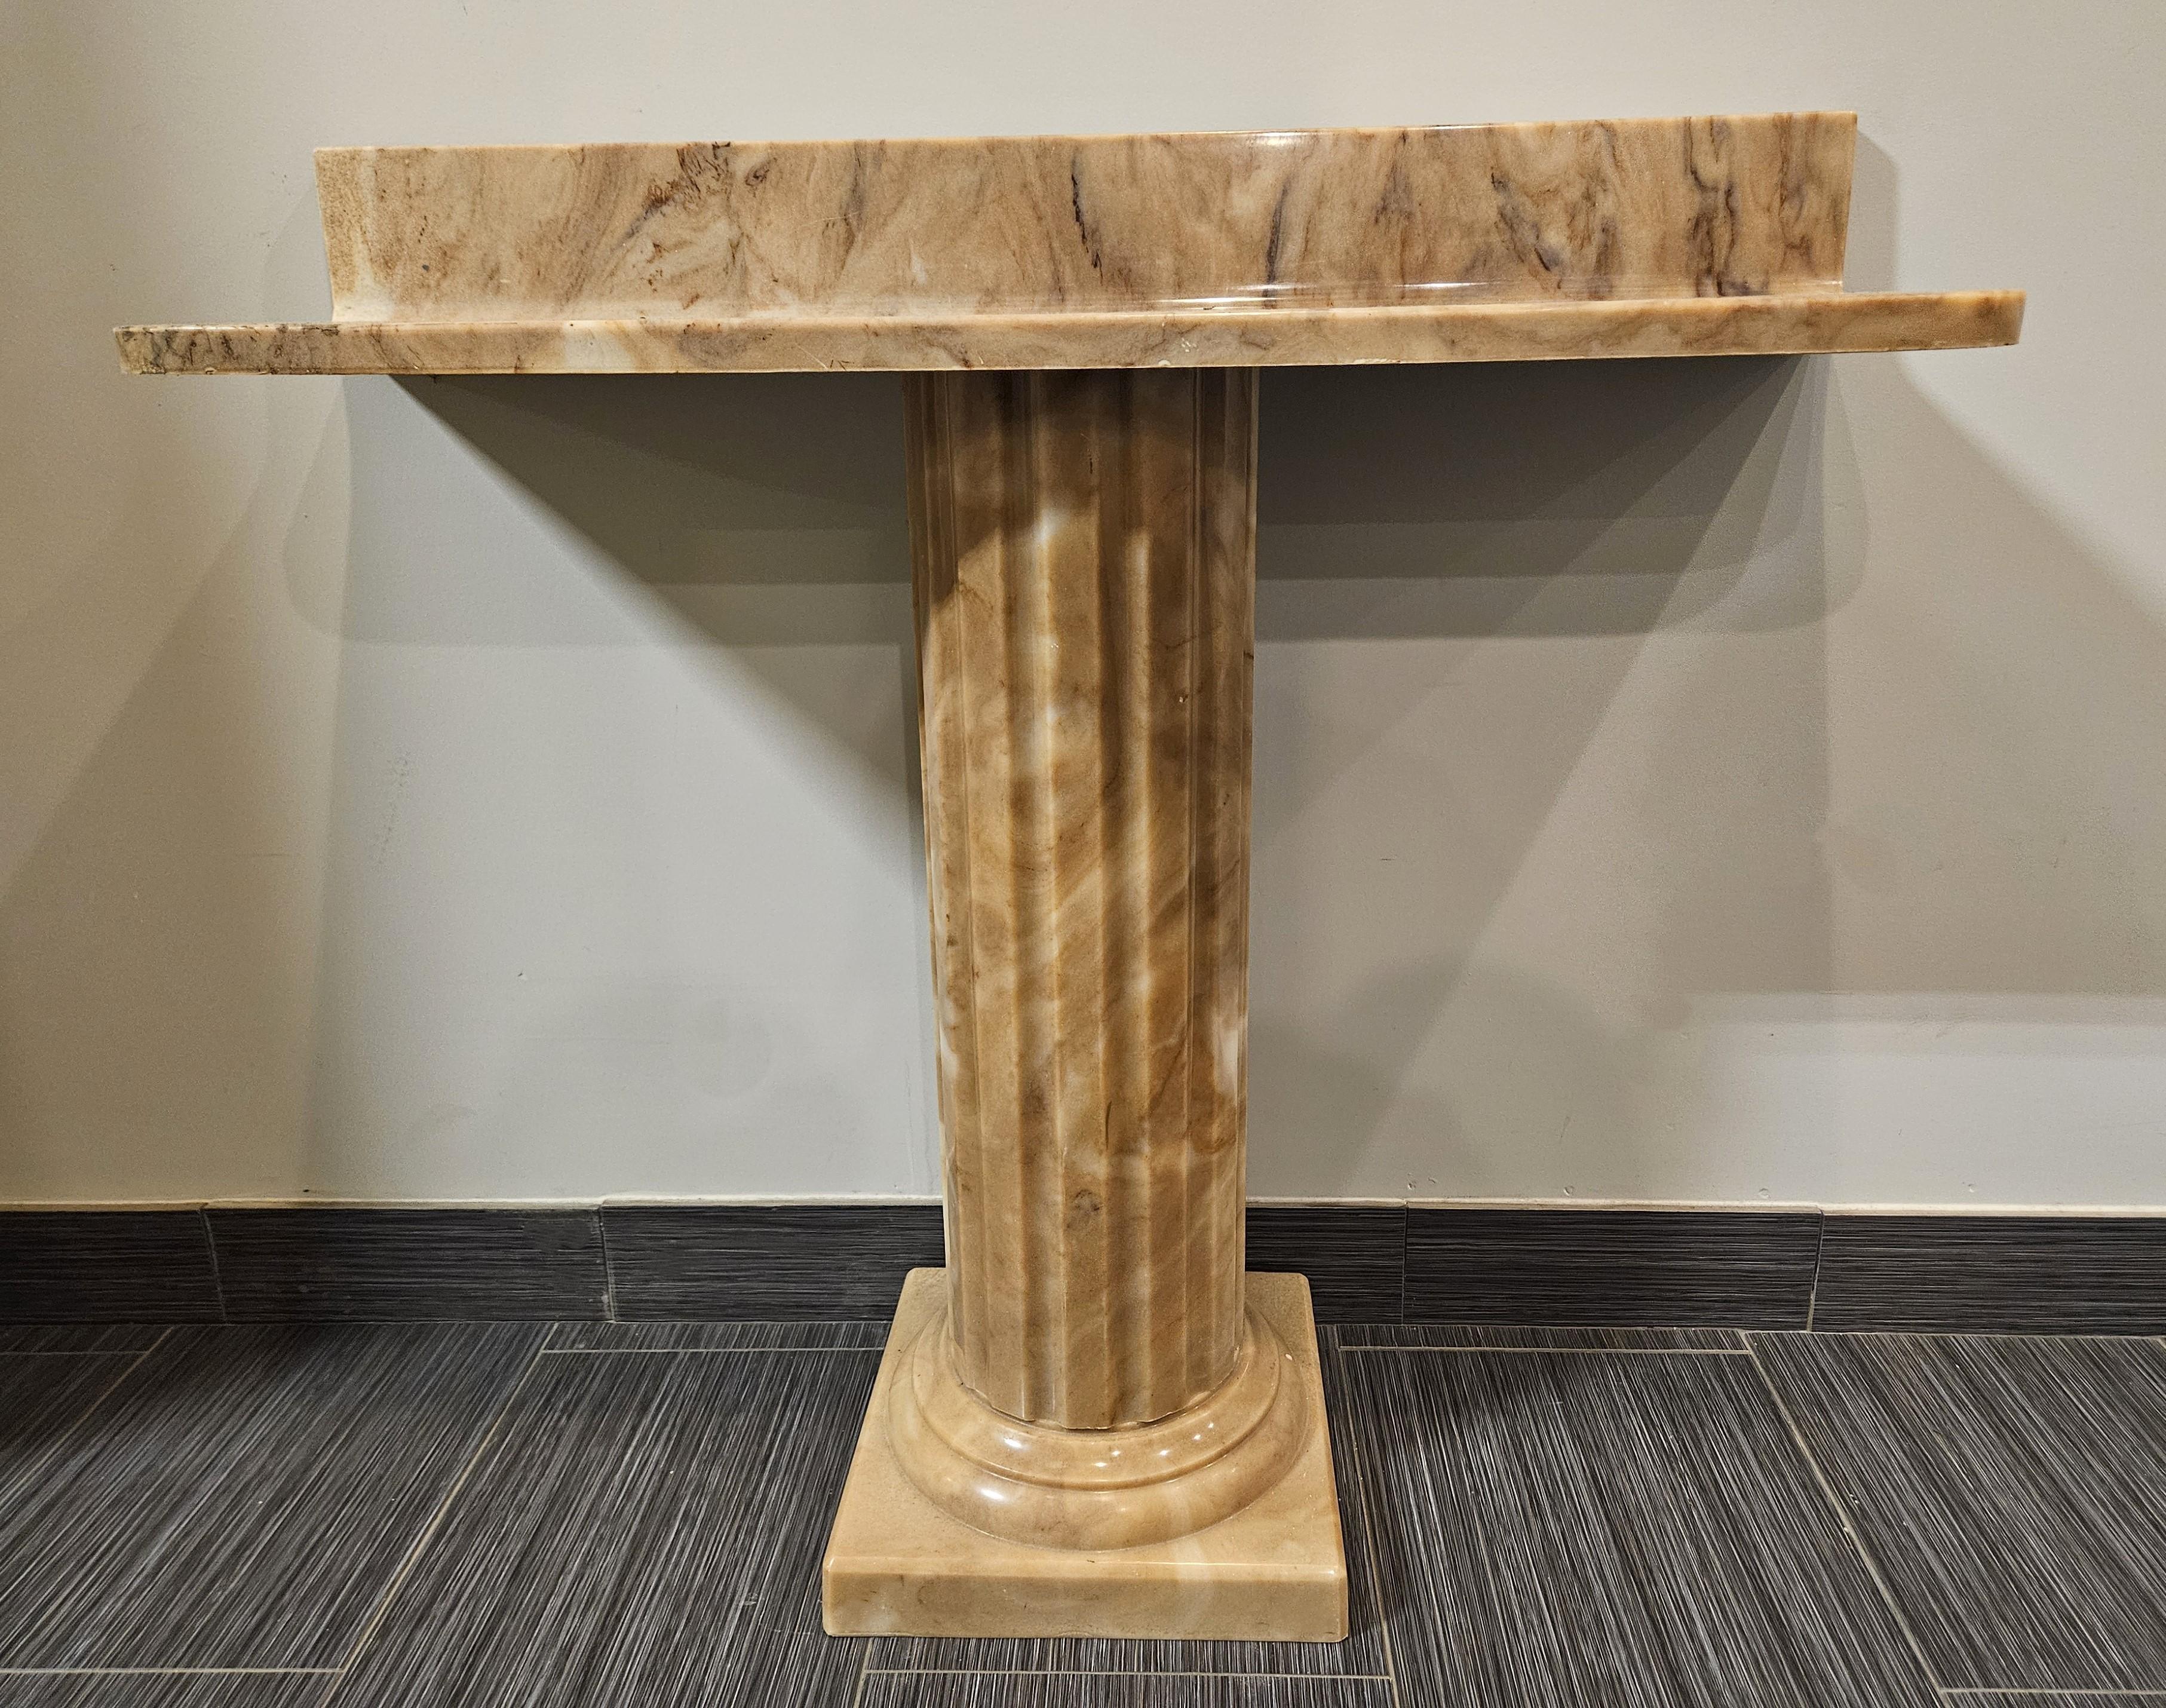 This Sherle Wagner console would be a stunning addition to a foyer, dining room, bedroom or bathroom. The top has a lovely grain pattern that sits on a separate fluted column base.  Top and base are separate for easy transporting!  Sink and pedestal